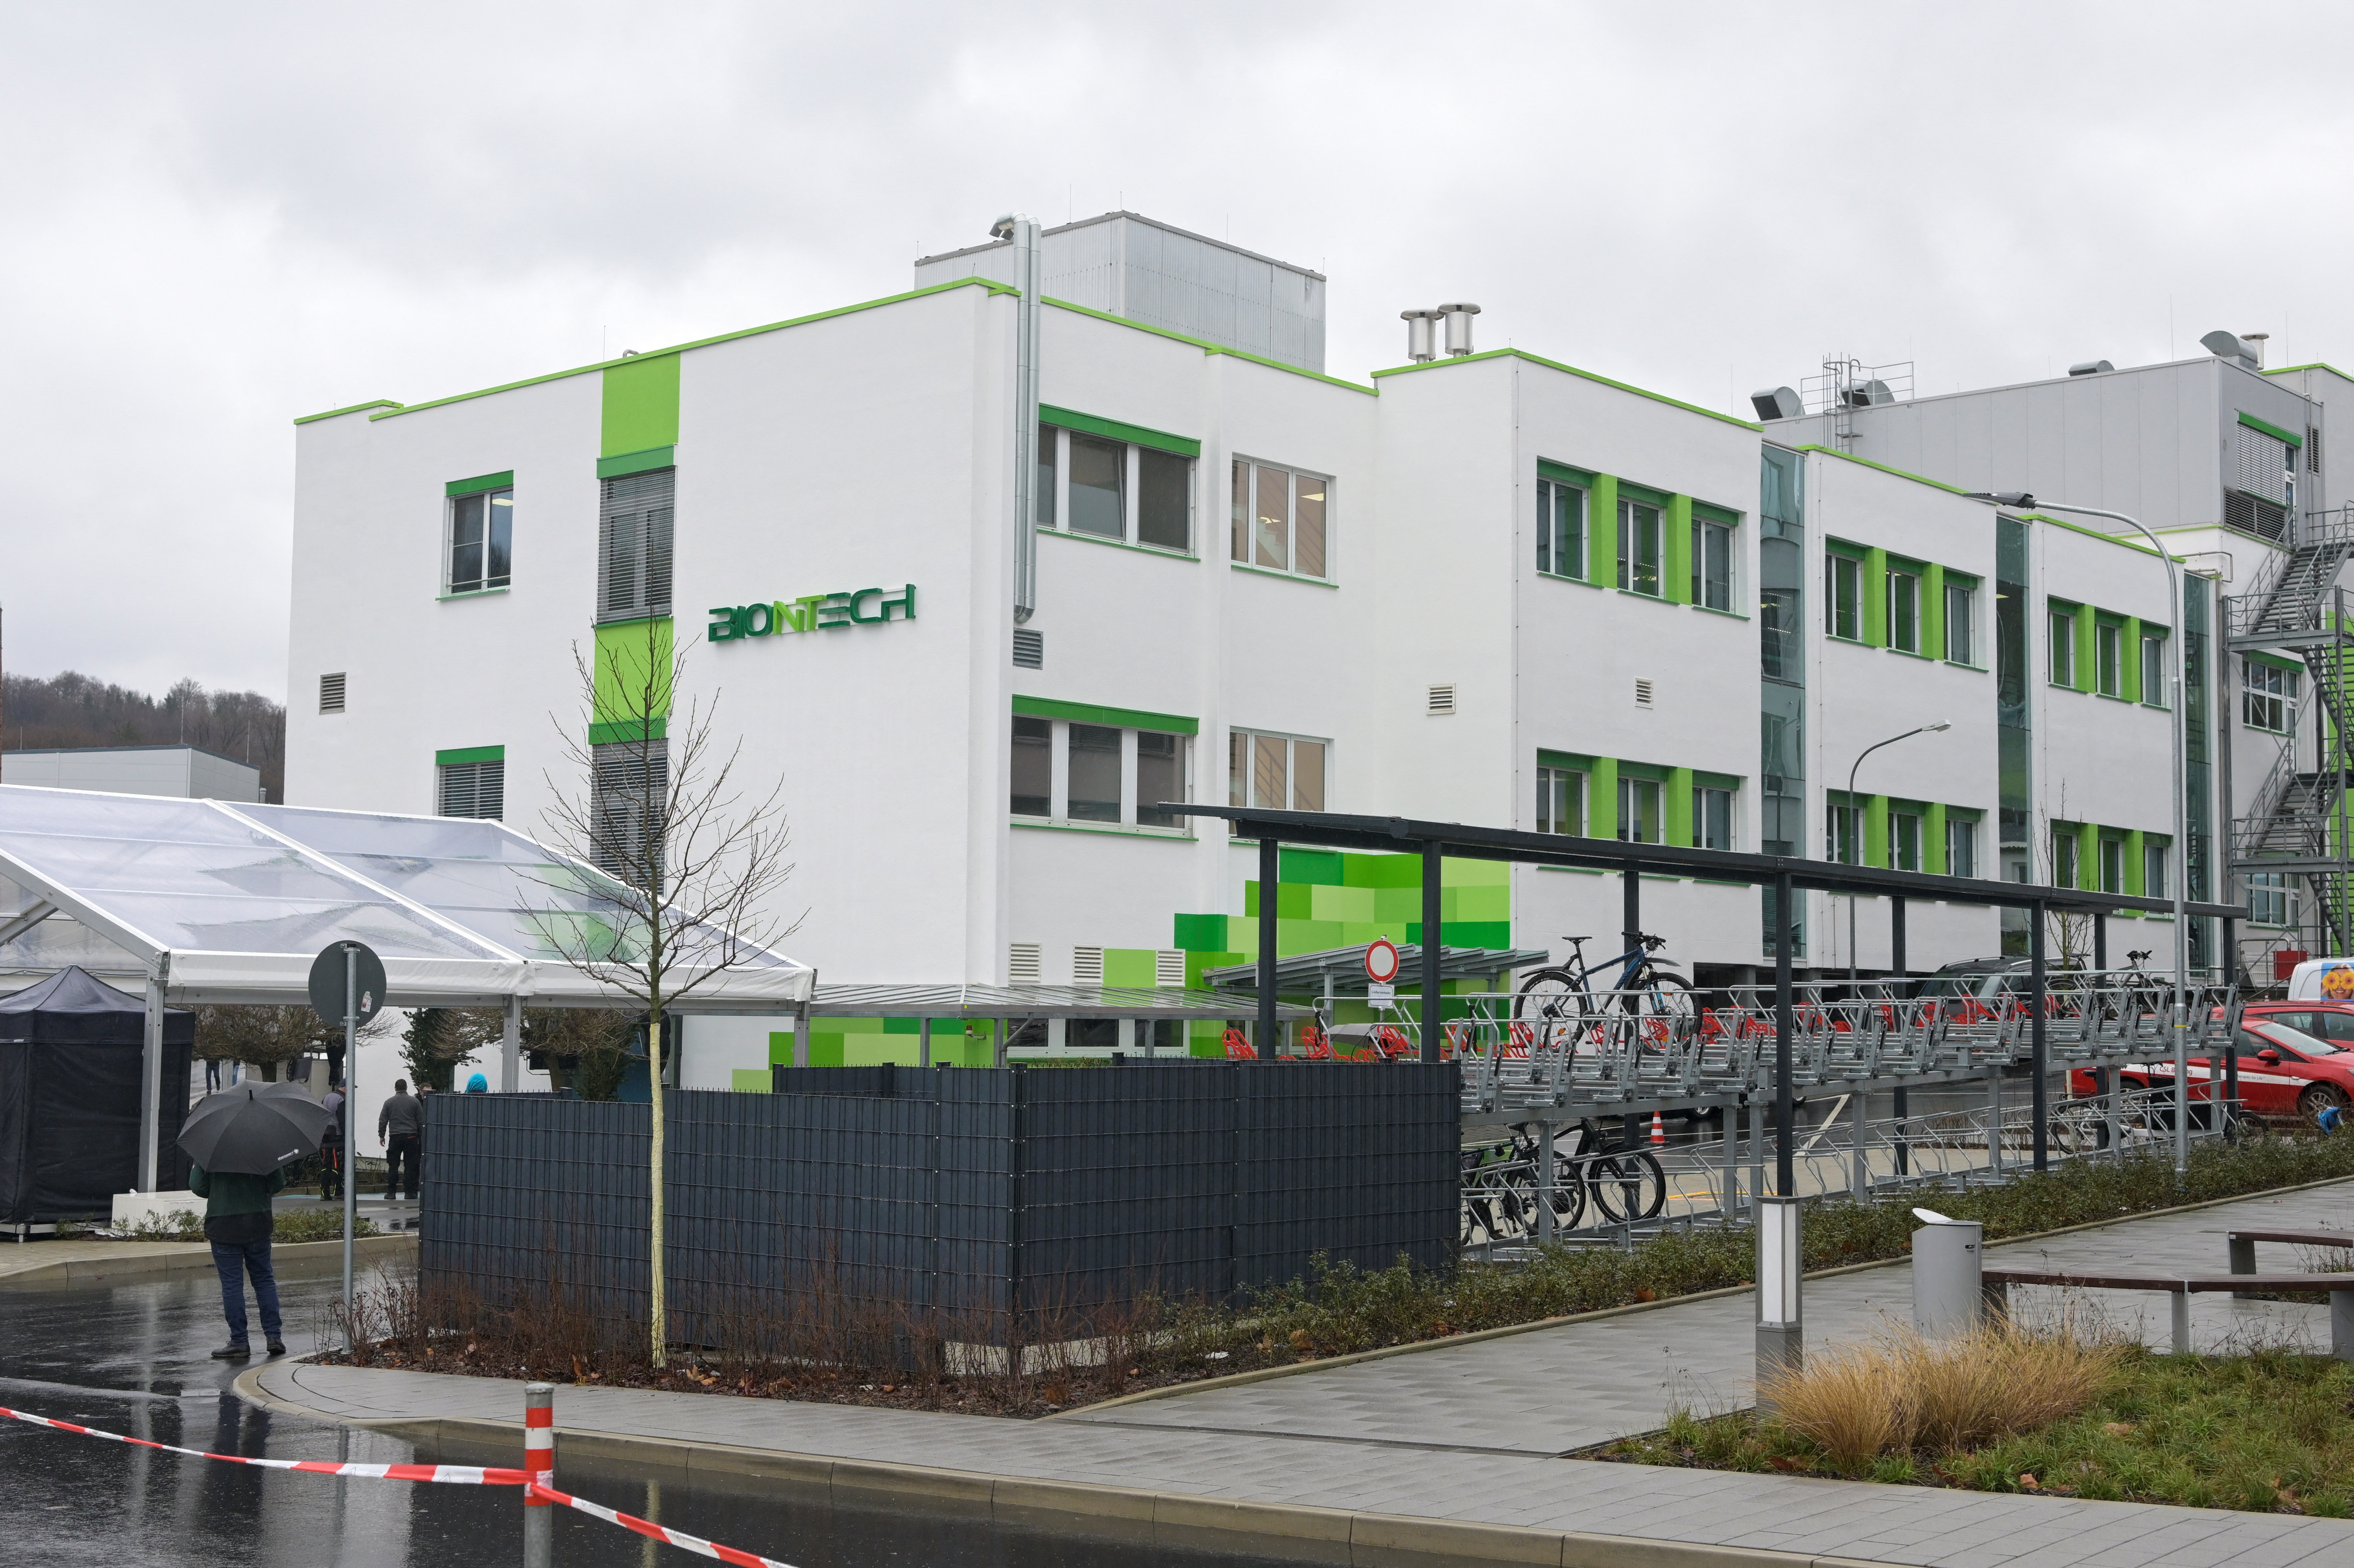 BioNTech facility in Marburg